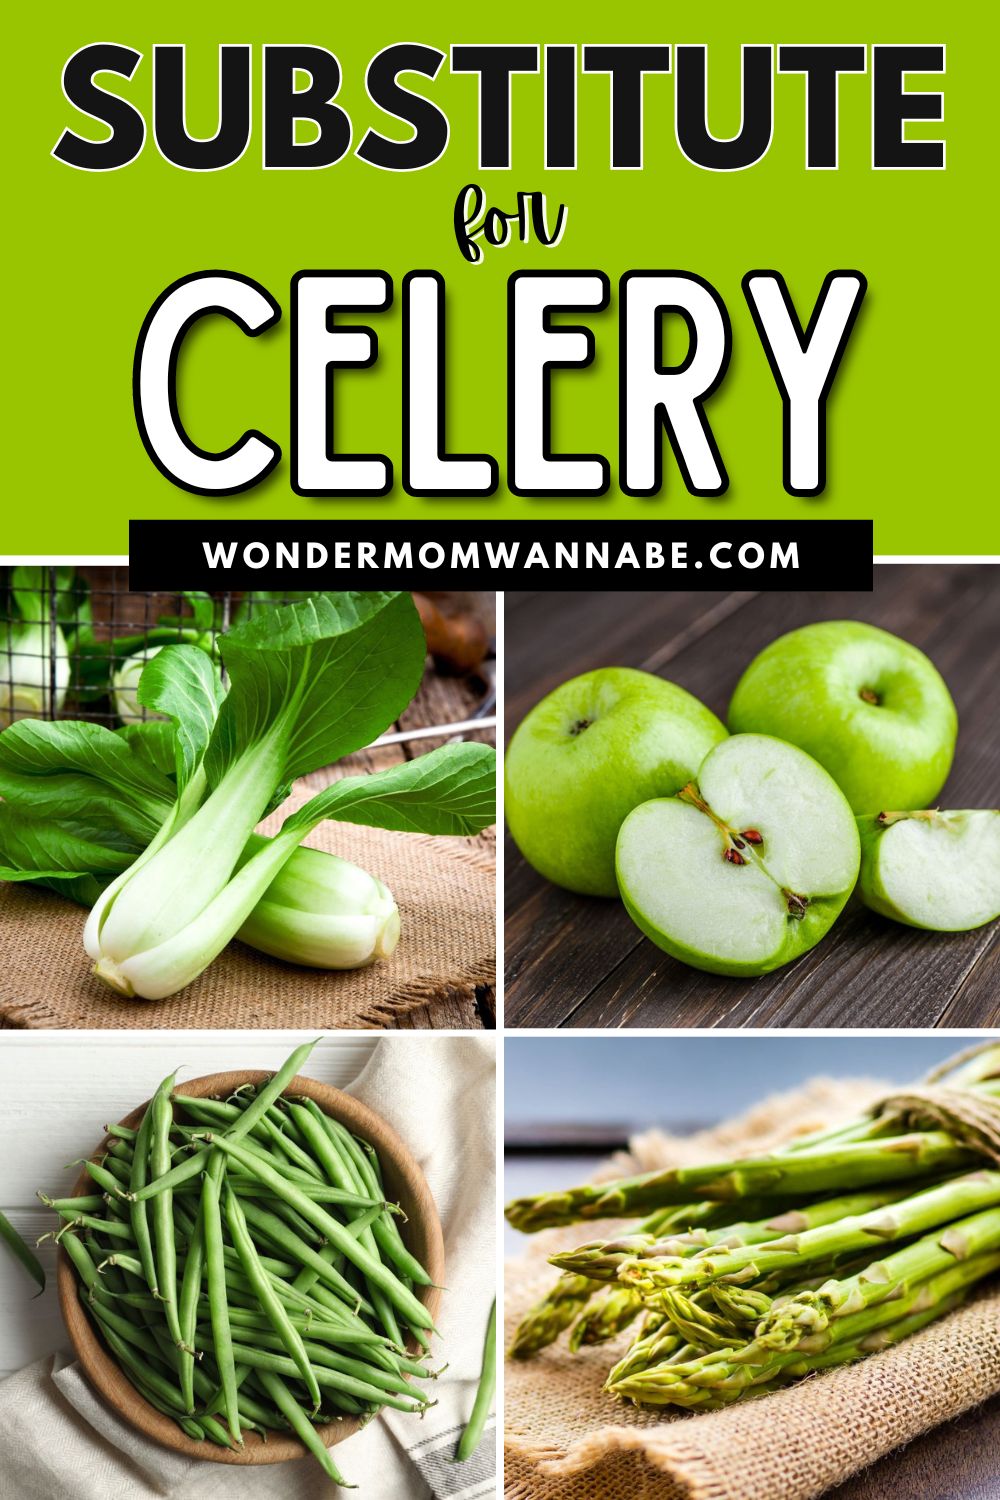 A vibrant collage of vegetables, offering a perfect substitute for celery.